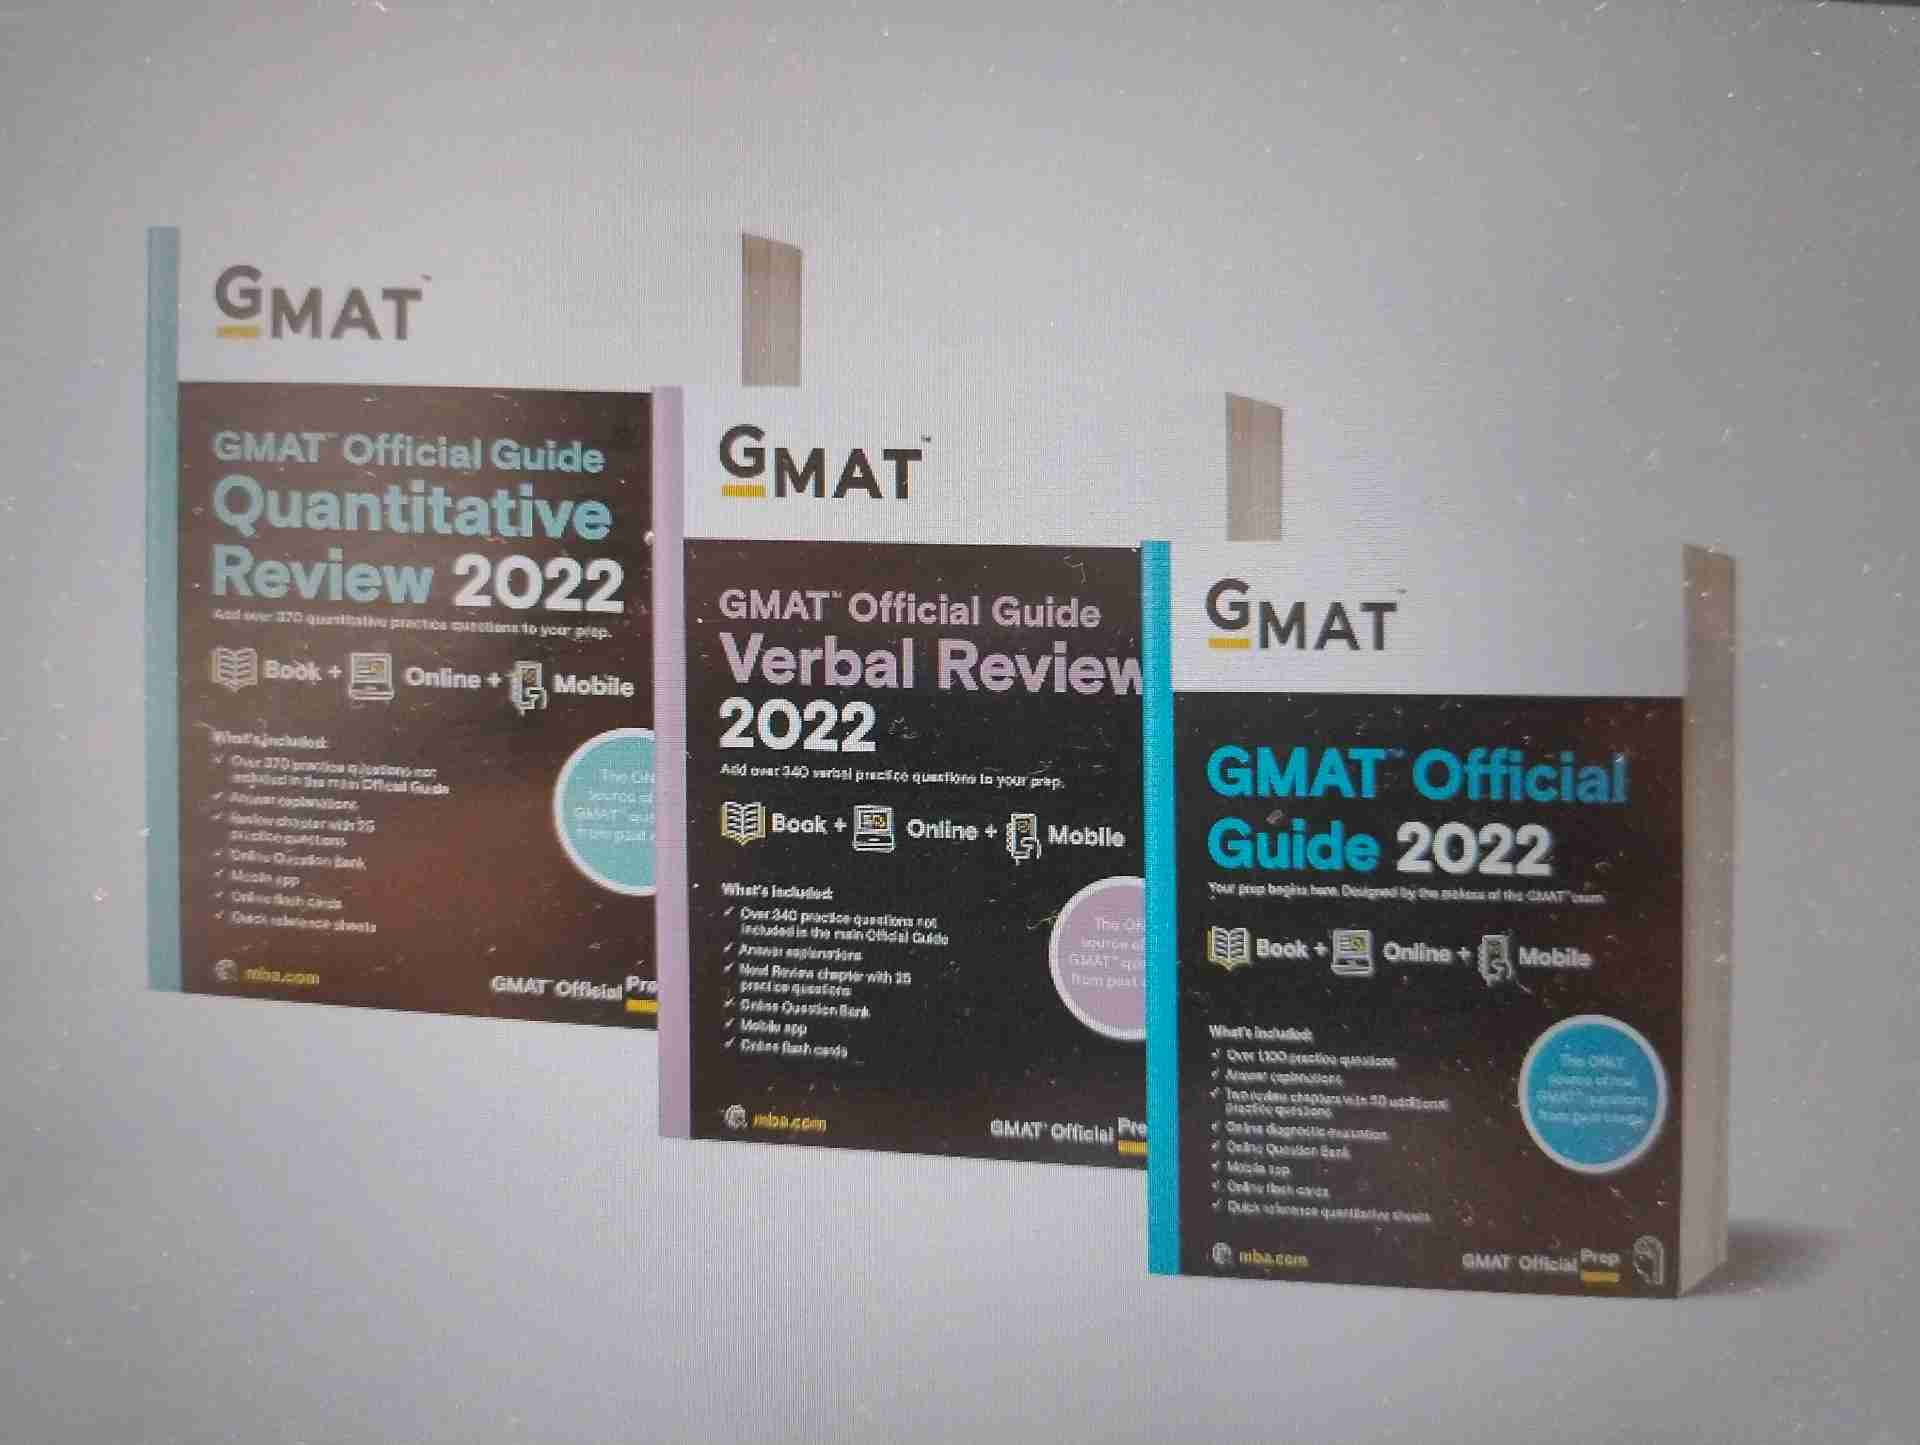 Gmat Official Guide 2022 + Gmat Official Guide Verbal Review 2022 + Gmat Official Guide Quantitative Review 2022 libro usato